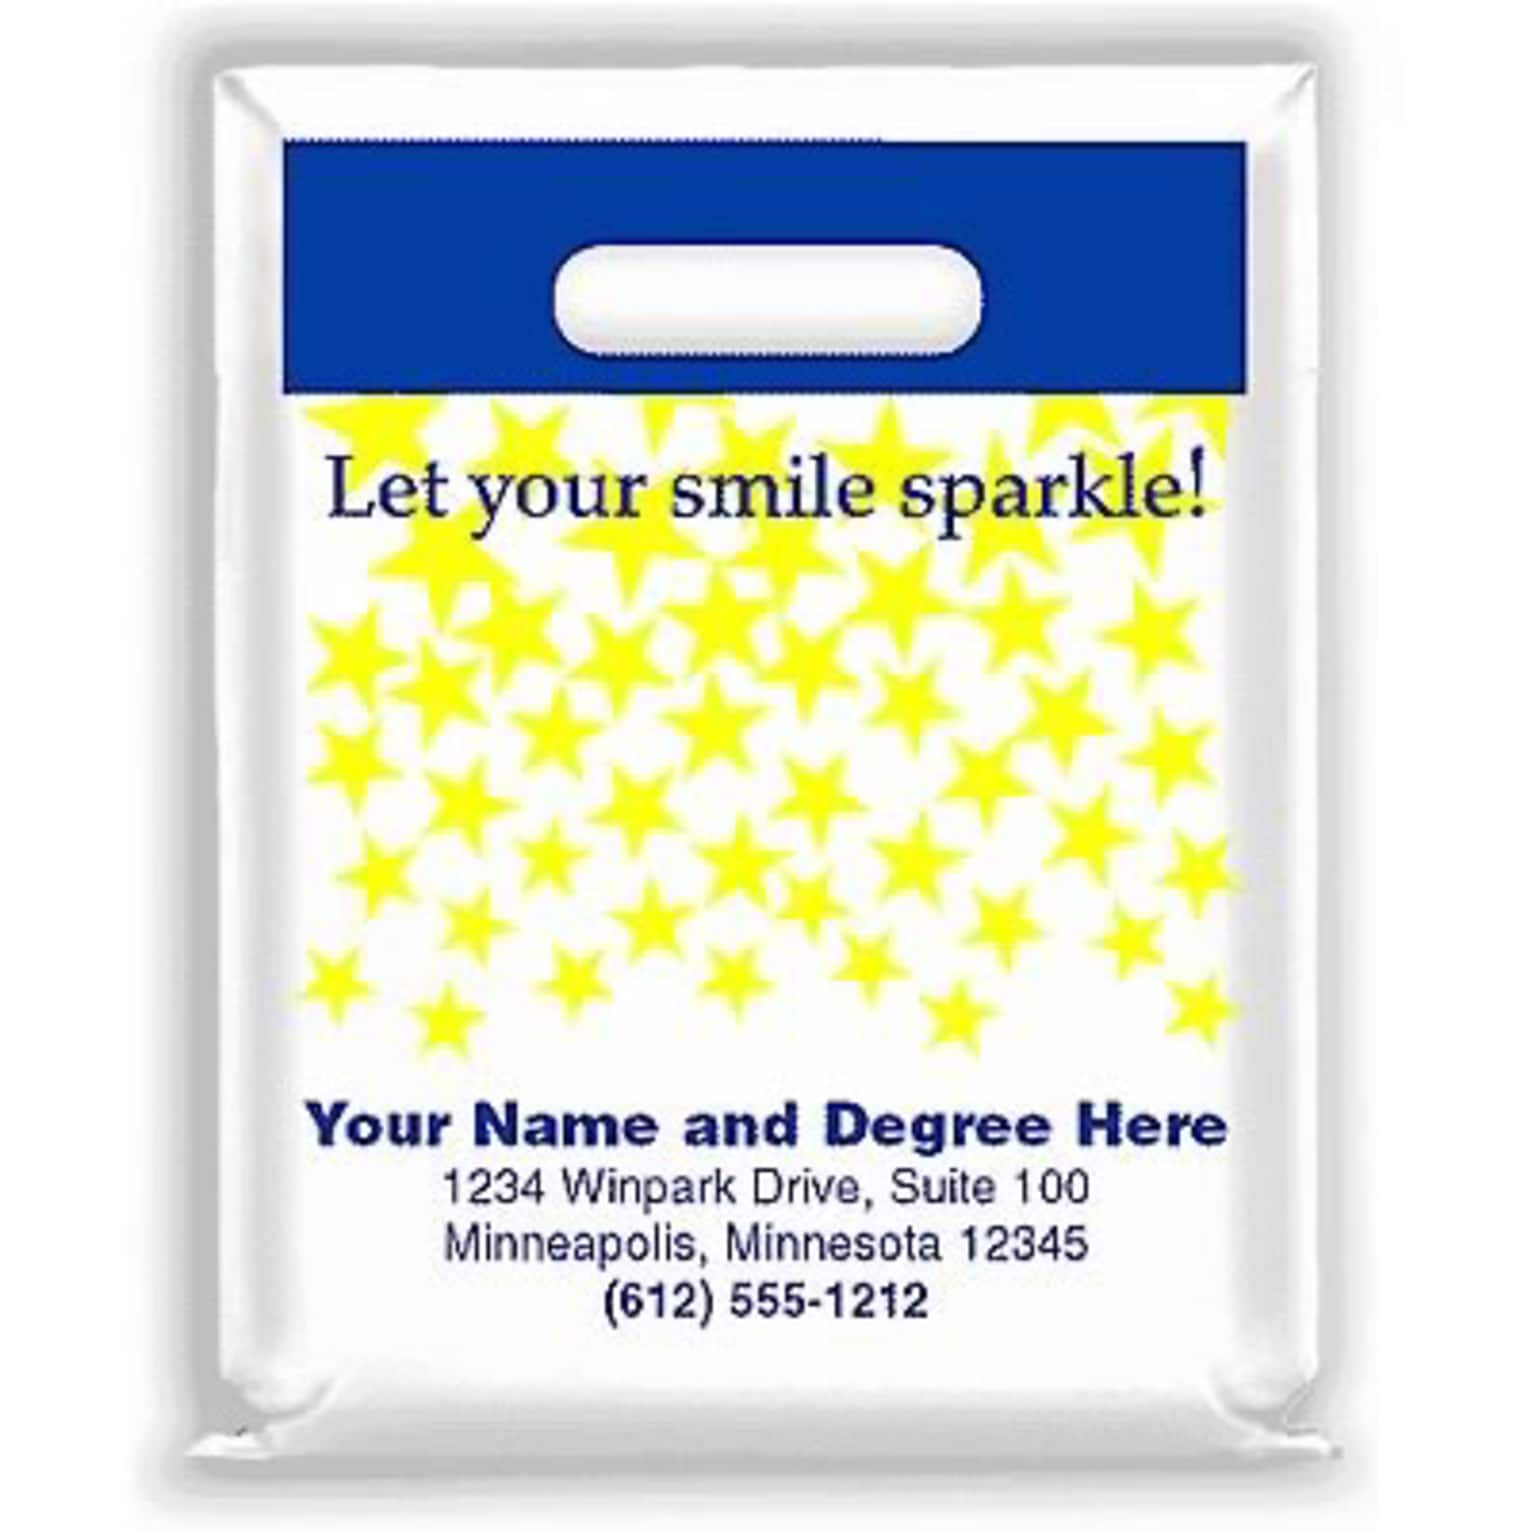 Medical Arts Press® Dental Personalized Small 2-Color Supply Bags; 7-1/2x9, Let Your Smile Sparkle!, 100 Bags, (53767)